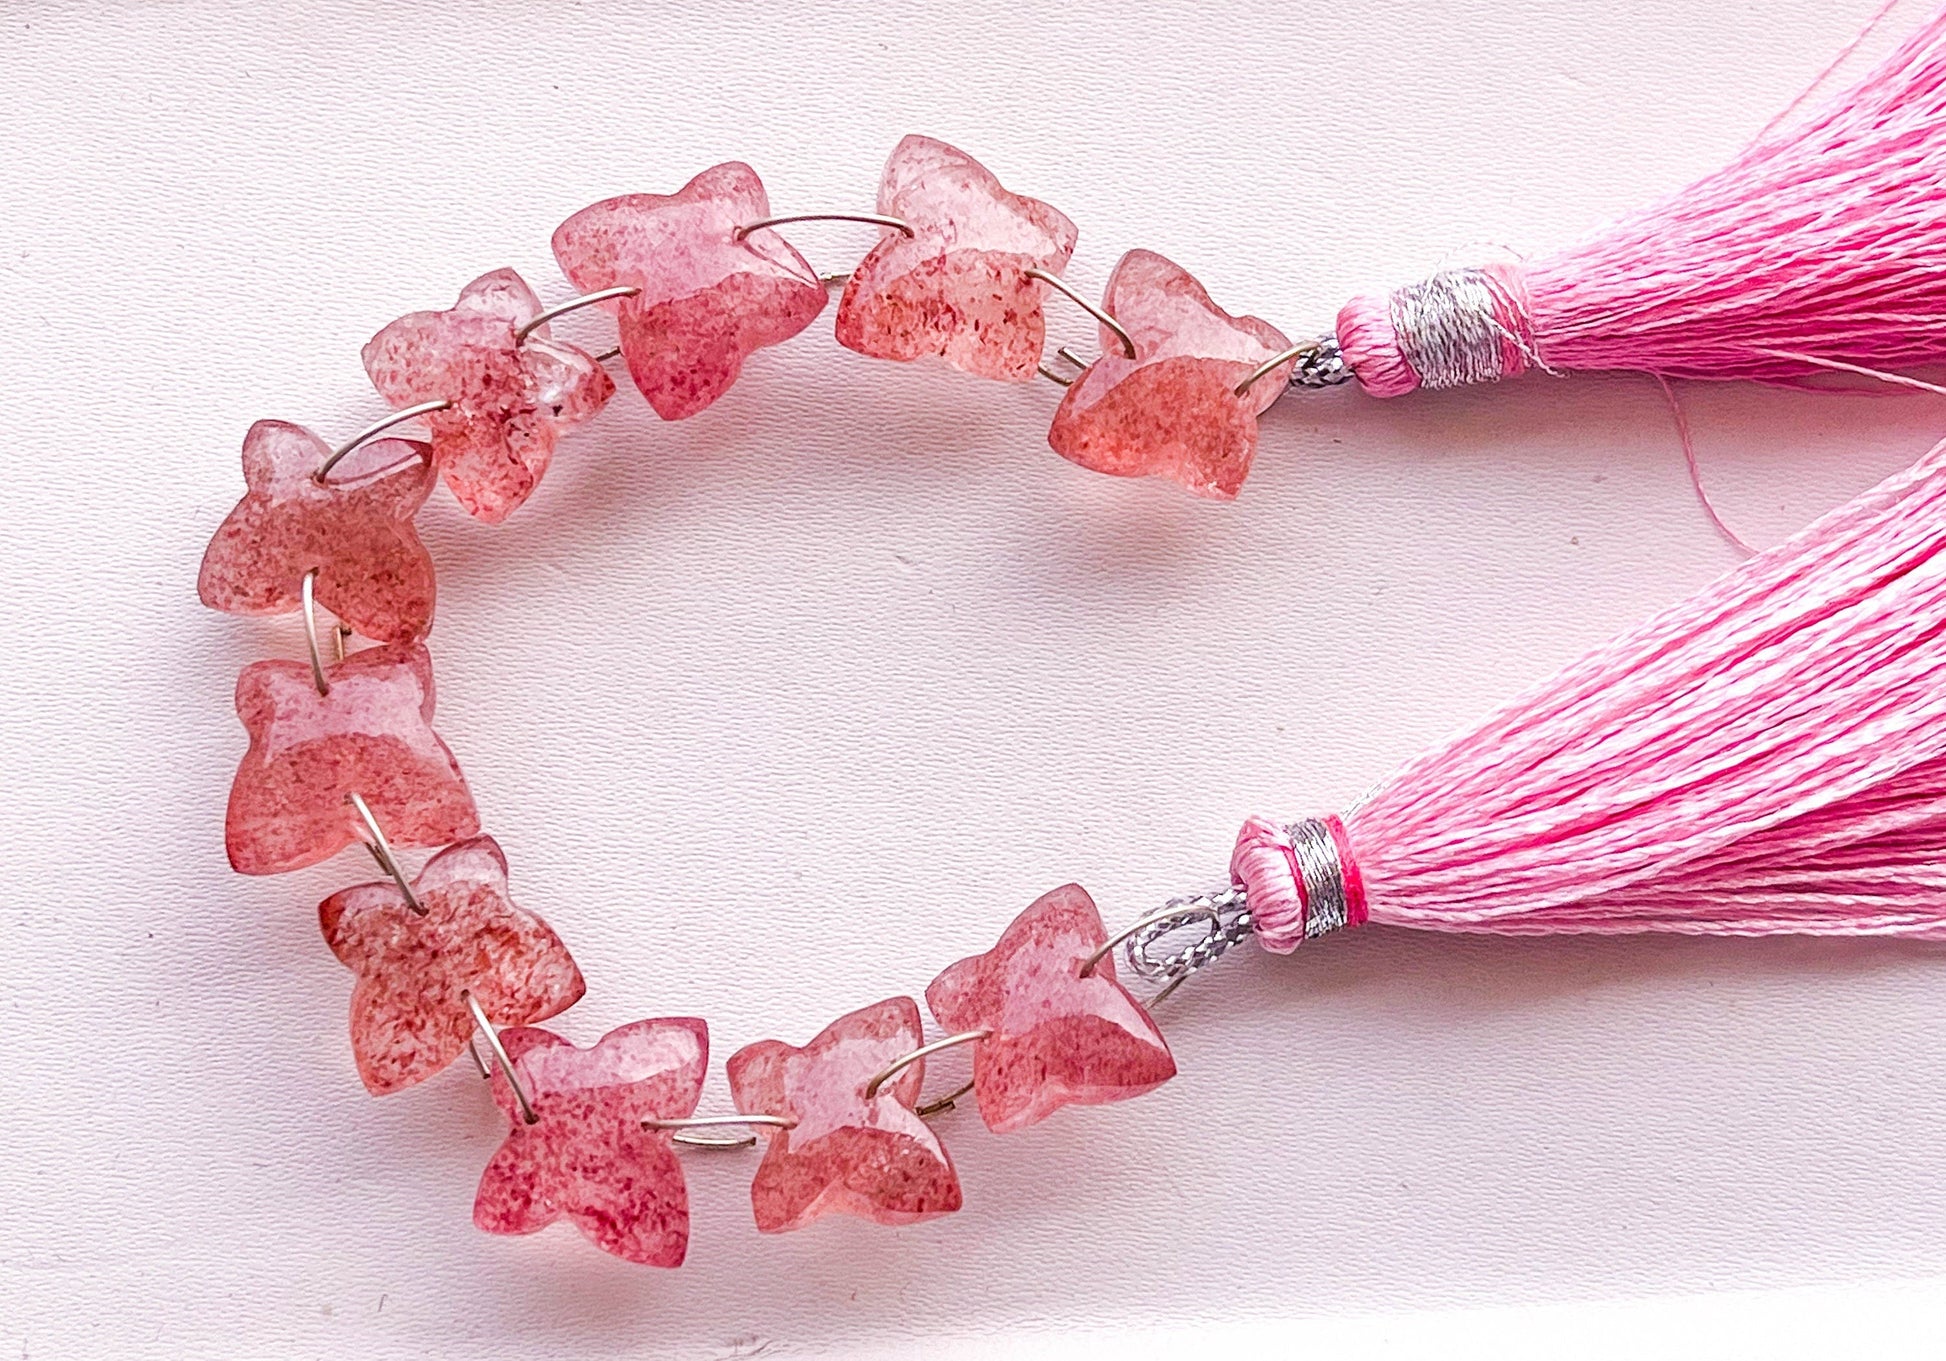 Pink Strawberry Quartz Smooth Butterfly Shape Double Drill Beads, Rare Gemstone Design for Jewelry Making, 10x12mm, 10 Pieces String Beadsforyourjewelry